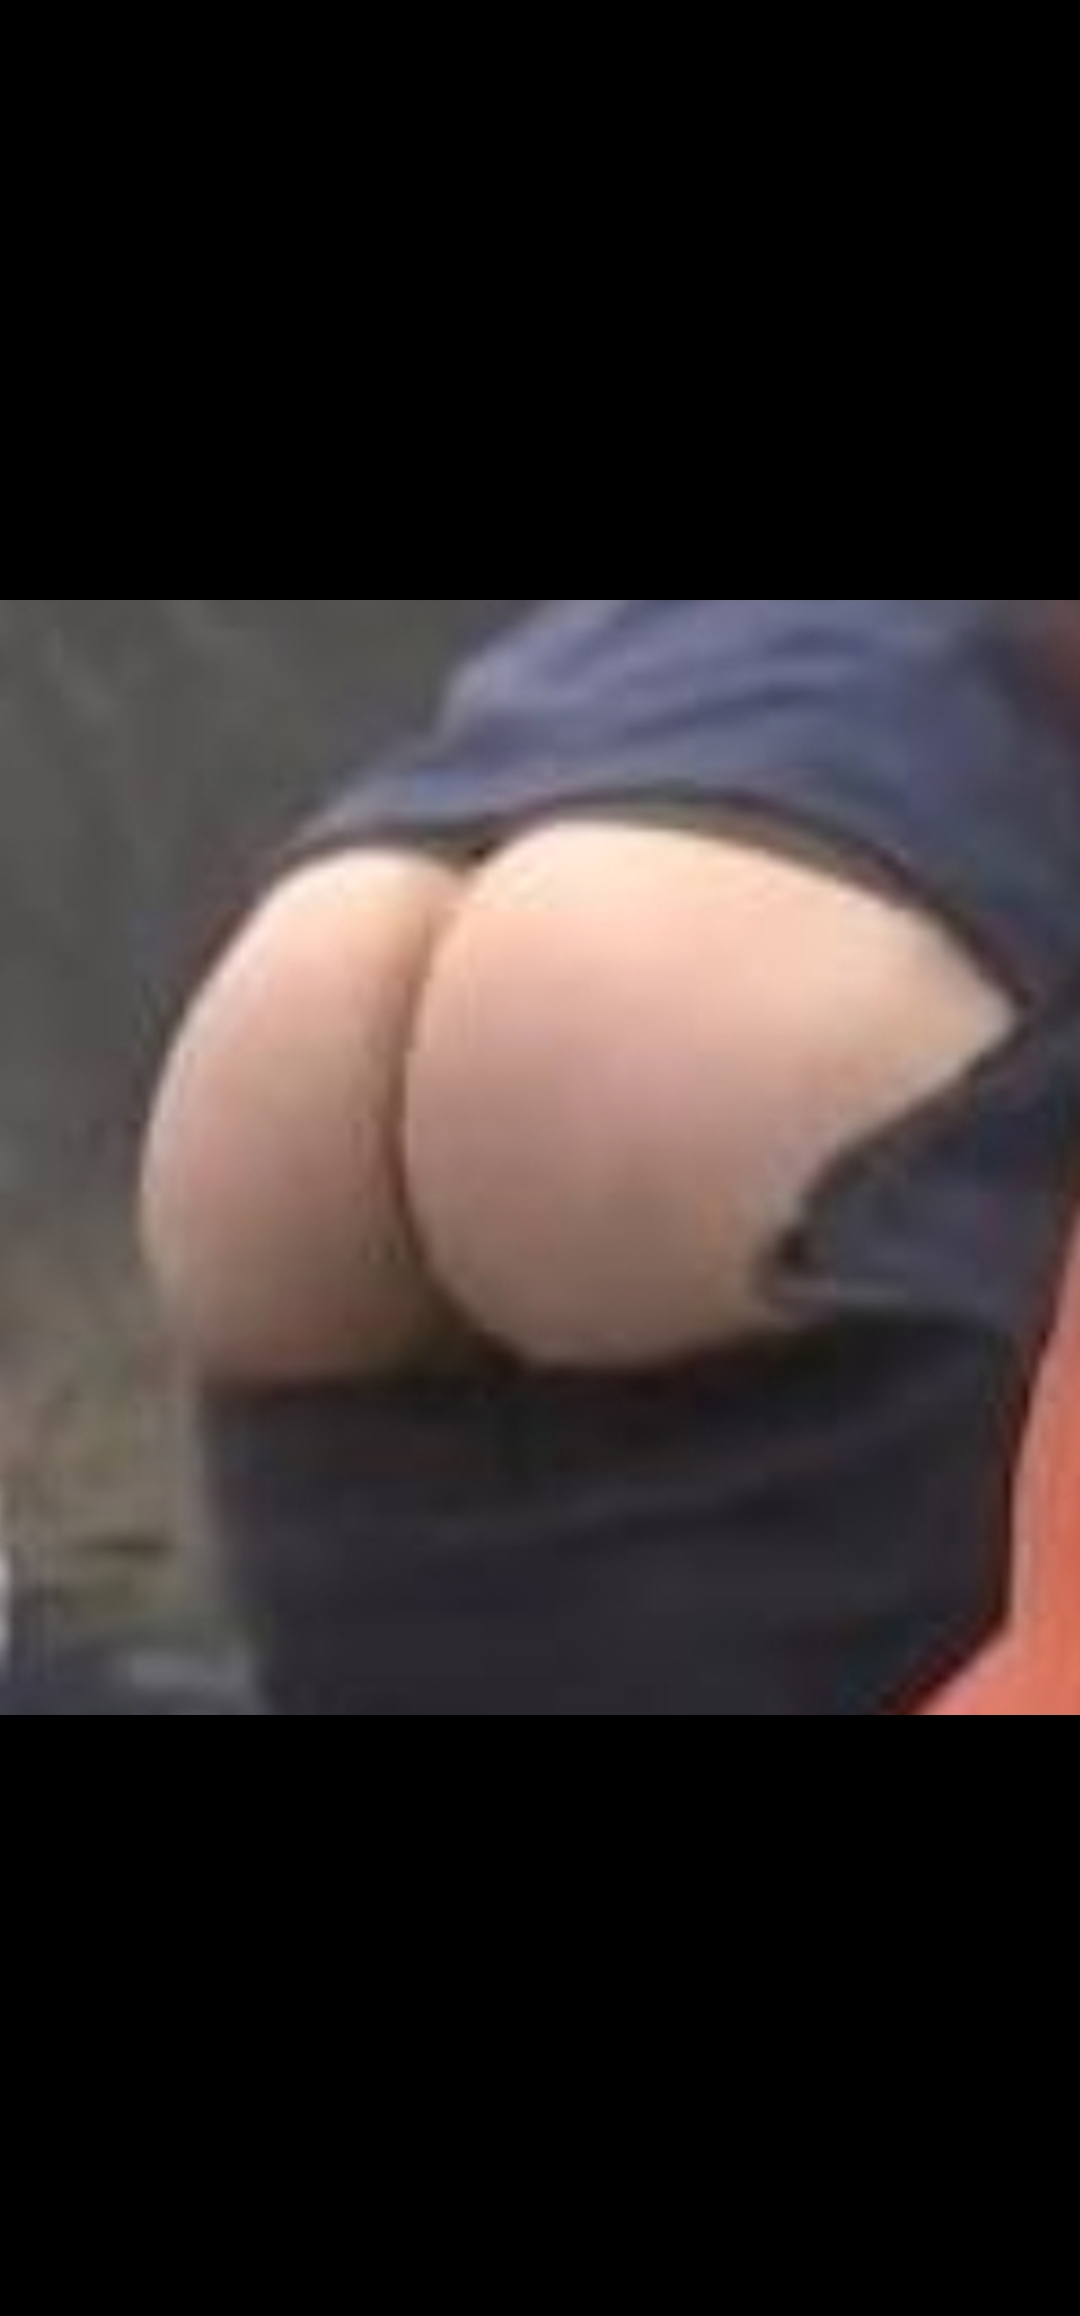 A French farmer shows his ass on TV